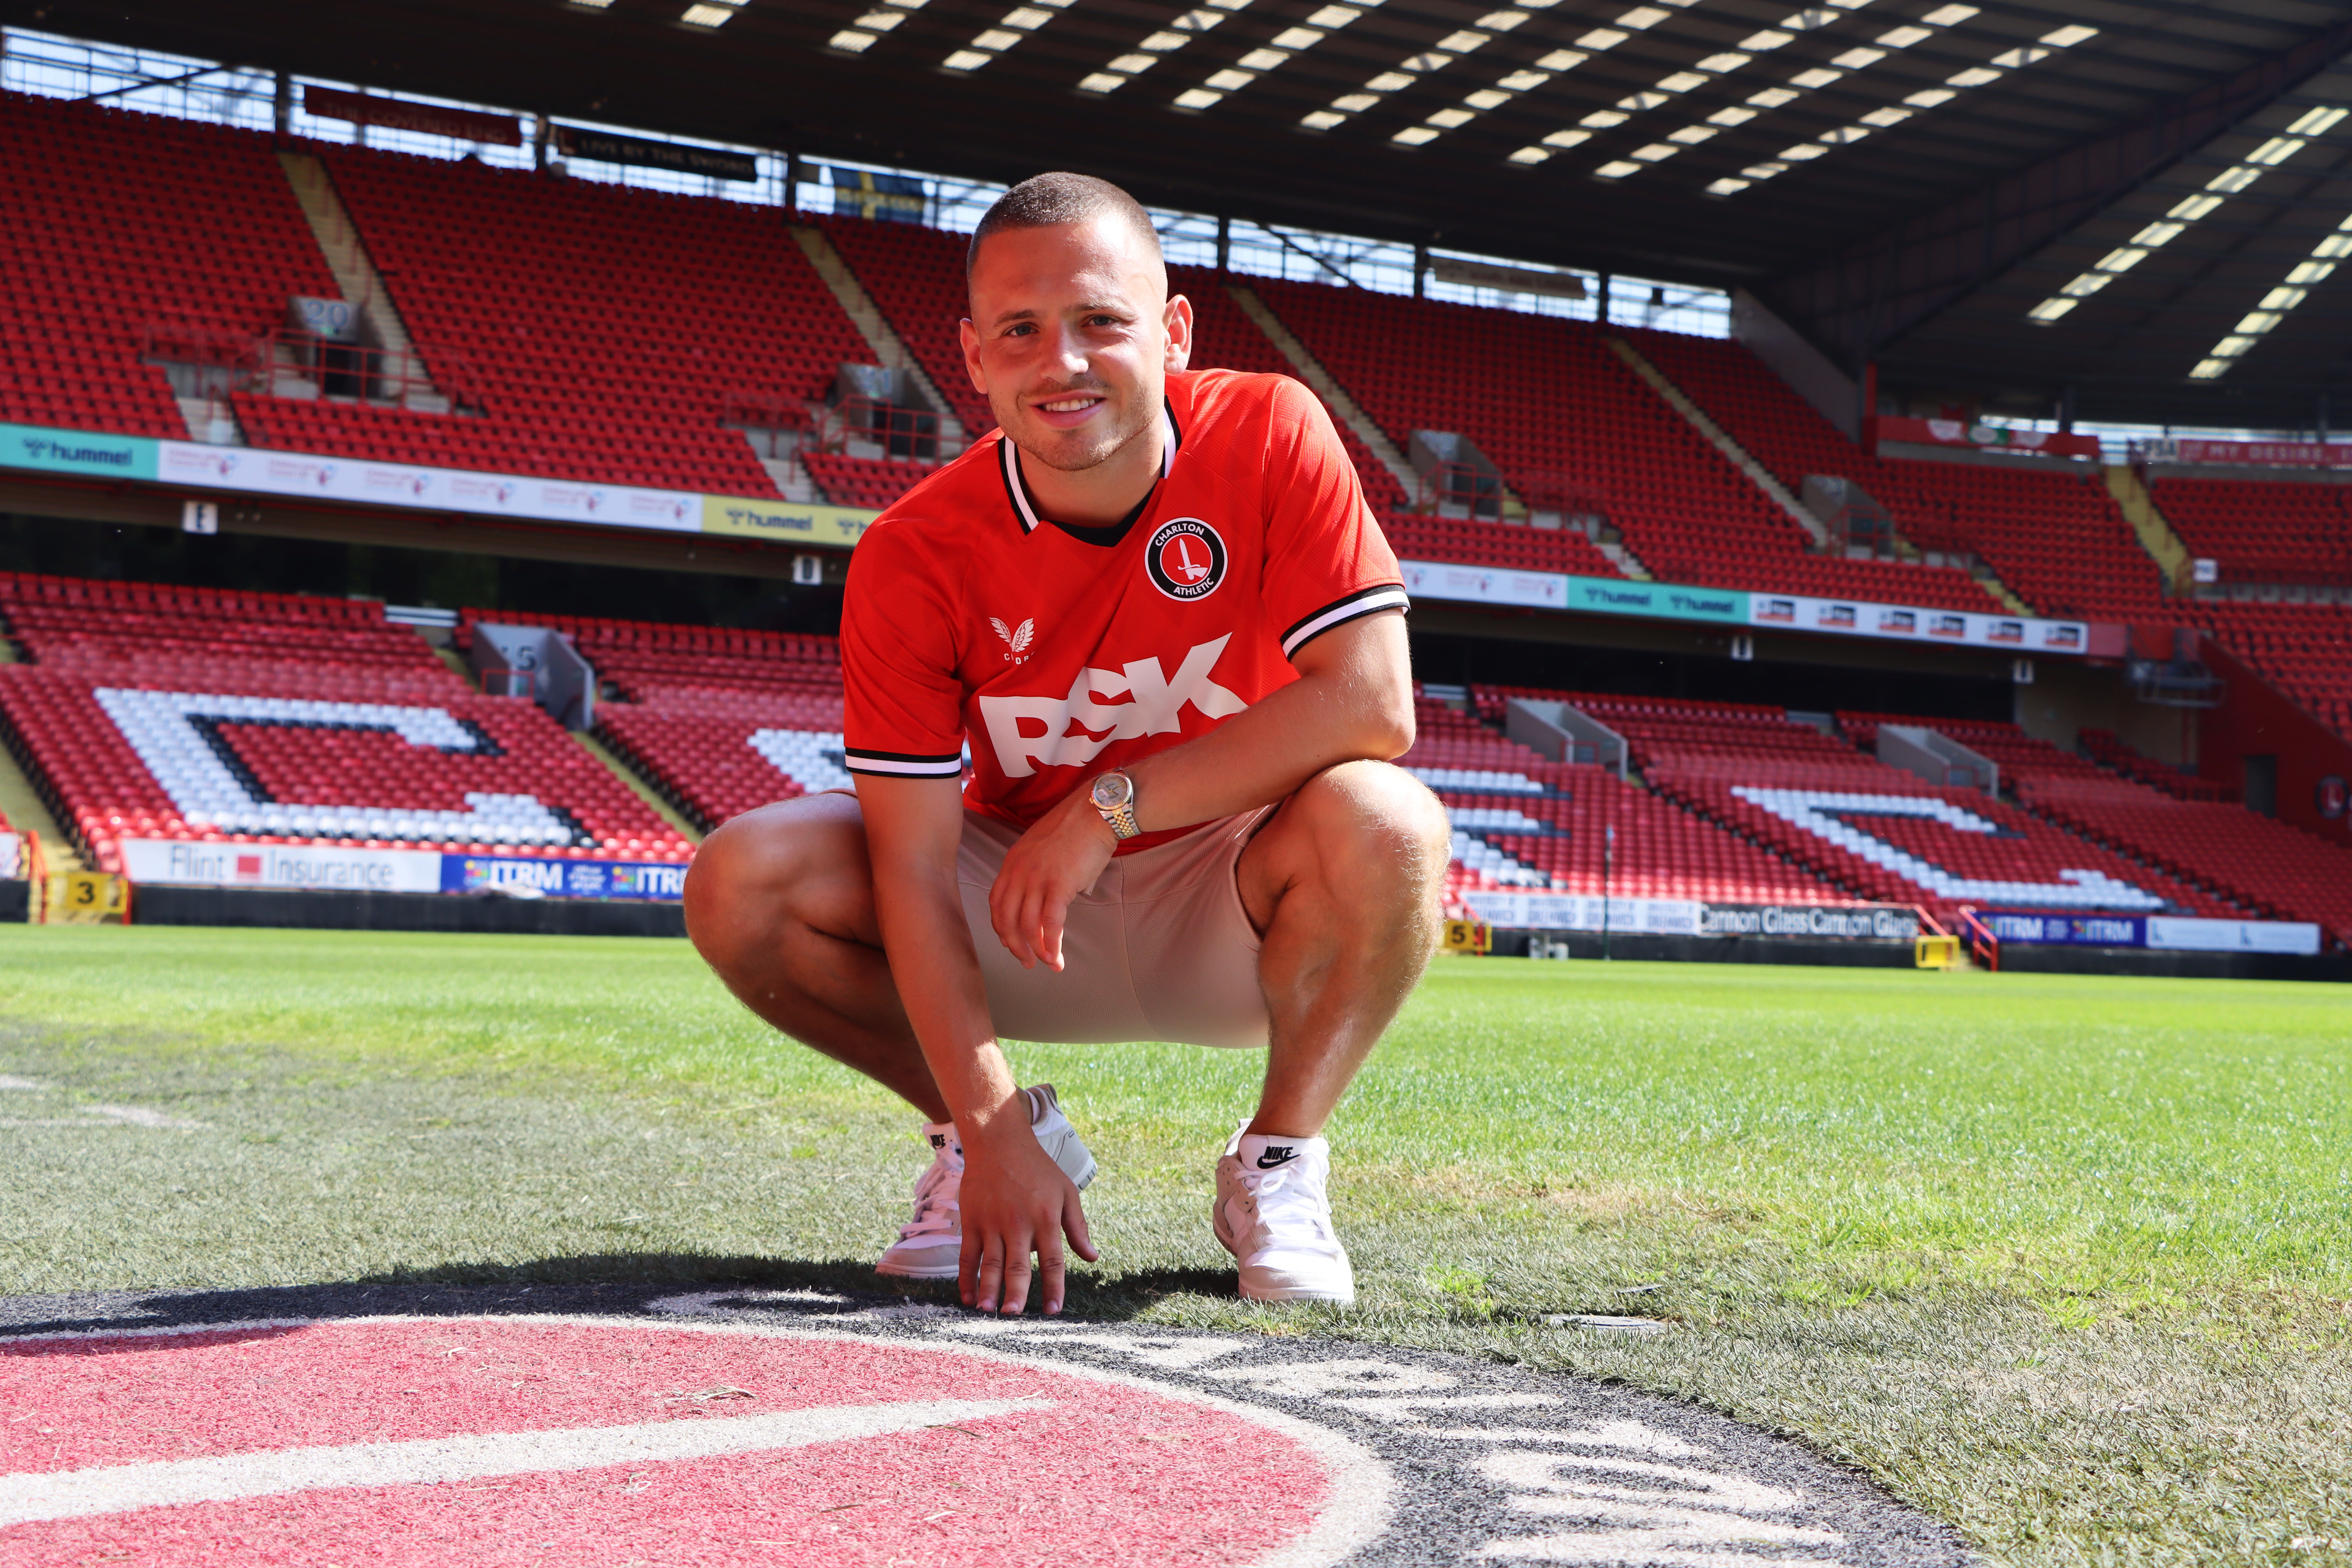 Jack Payne pitchside at The Valley